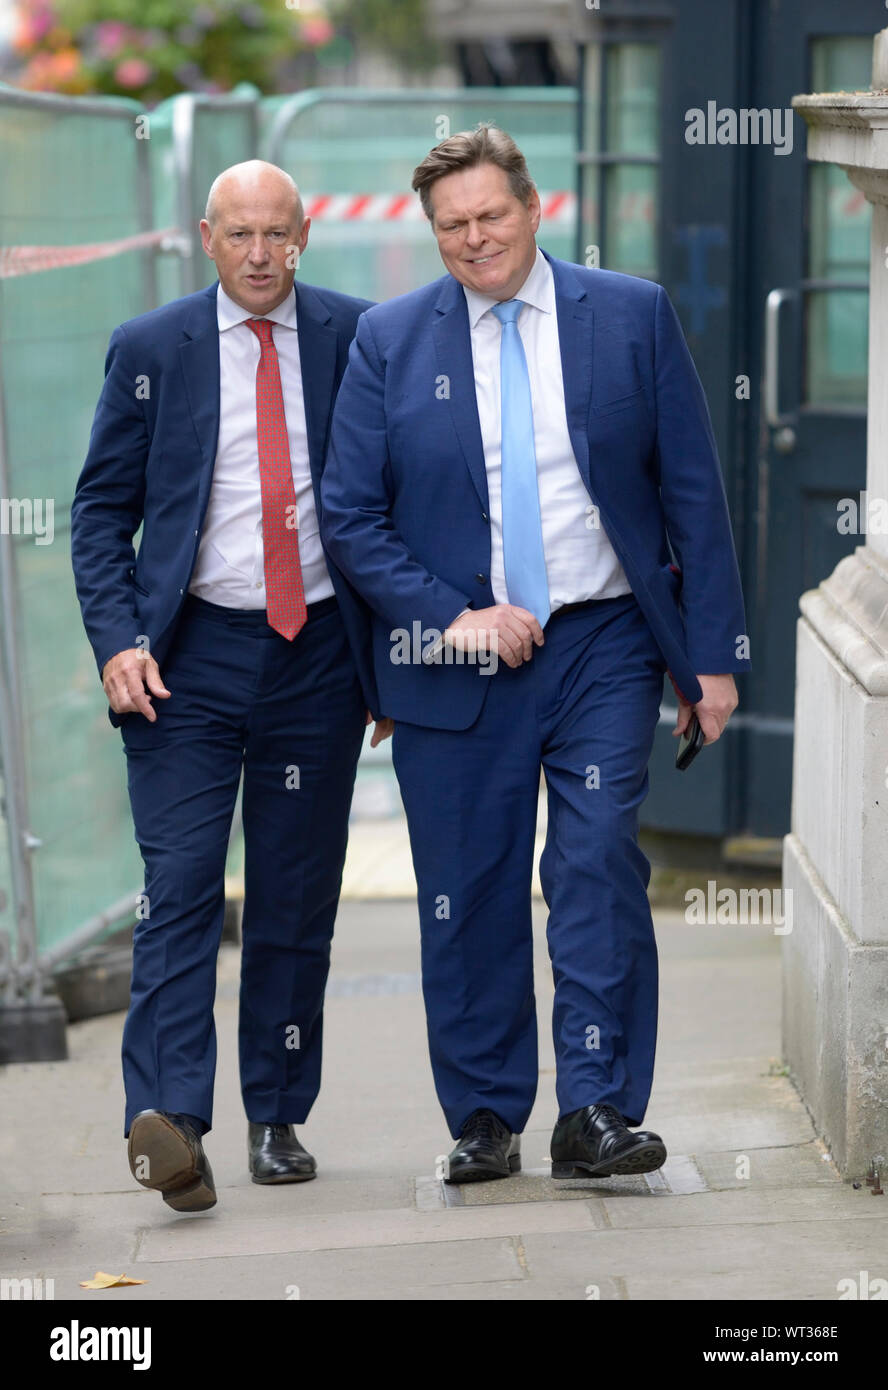 John Stevenson MP (Carlisle) and Stephen Kerr MP (Stirling) arrive in Downing Street for a gathering at Number 10, 2nd September 2019. Stock Photo